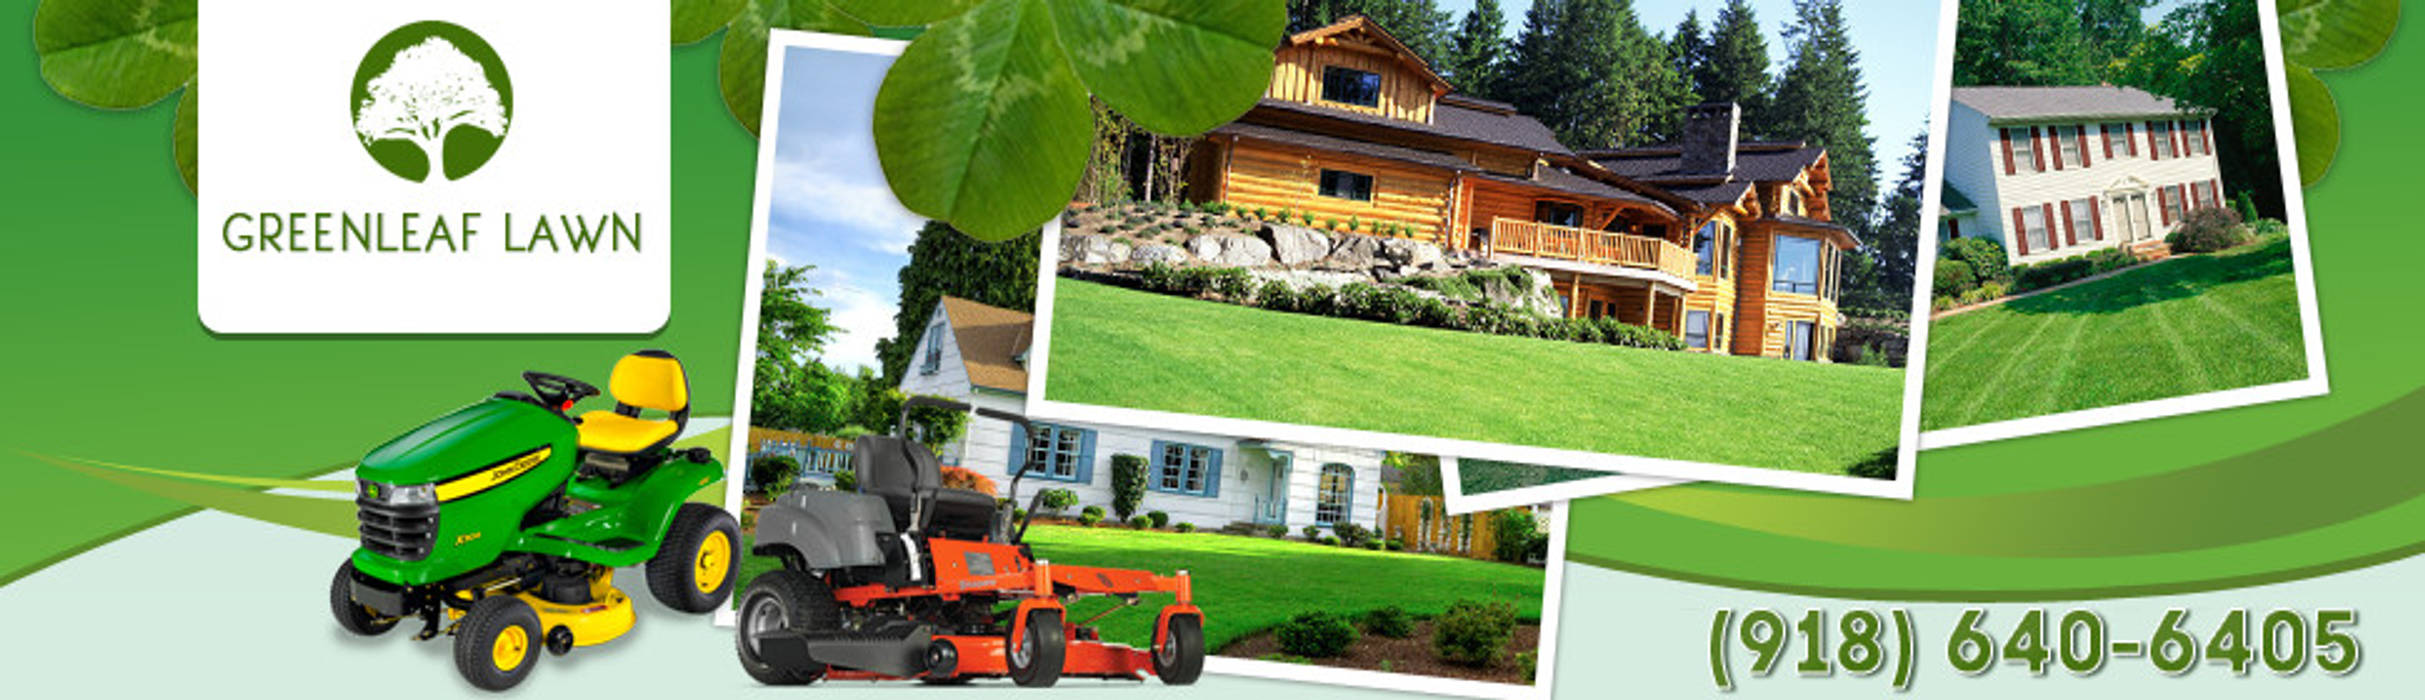 Main Reasons To Get Professional Lawn Care Services, Real Estate Real Estate 房子